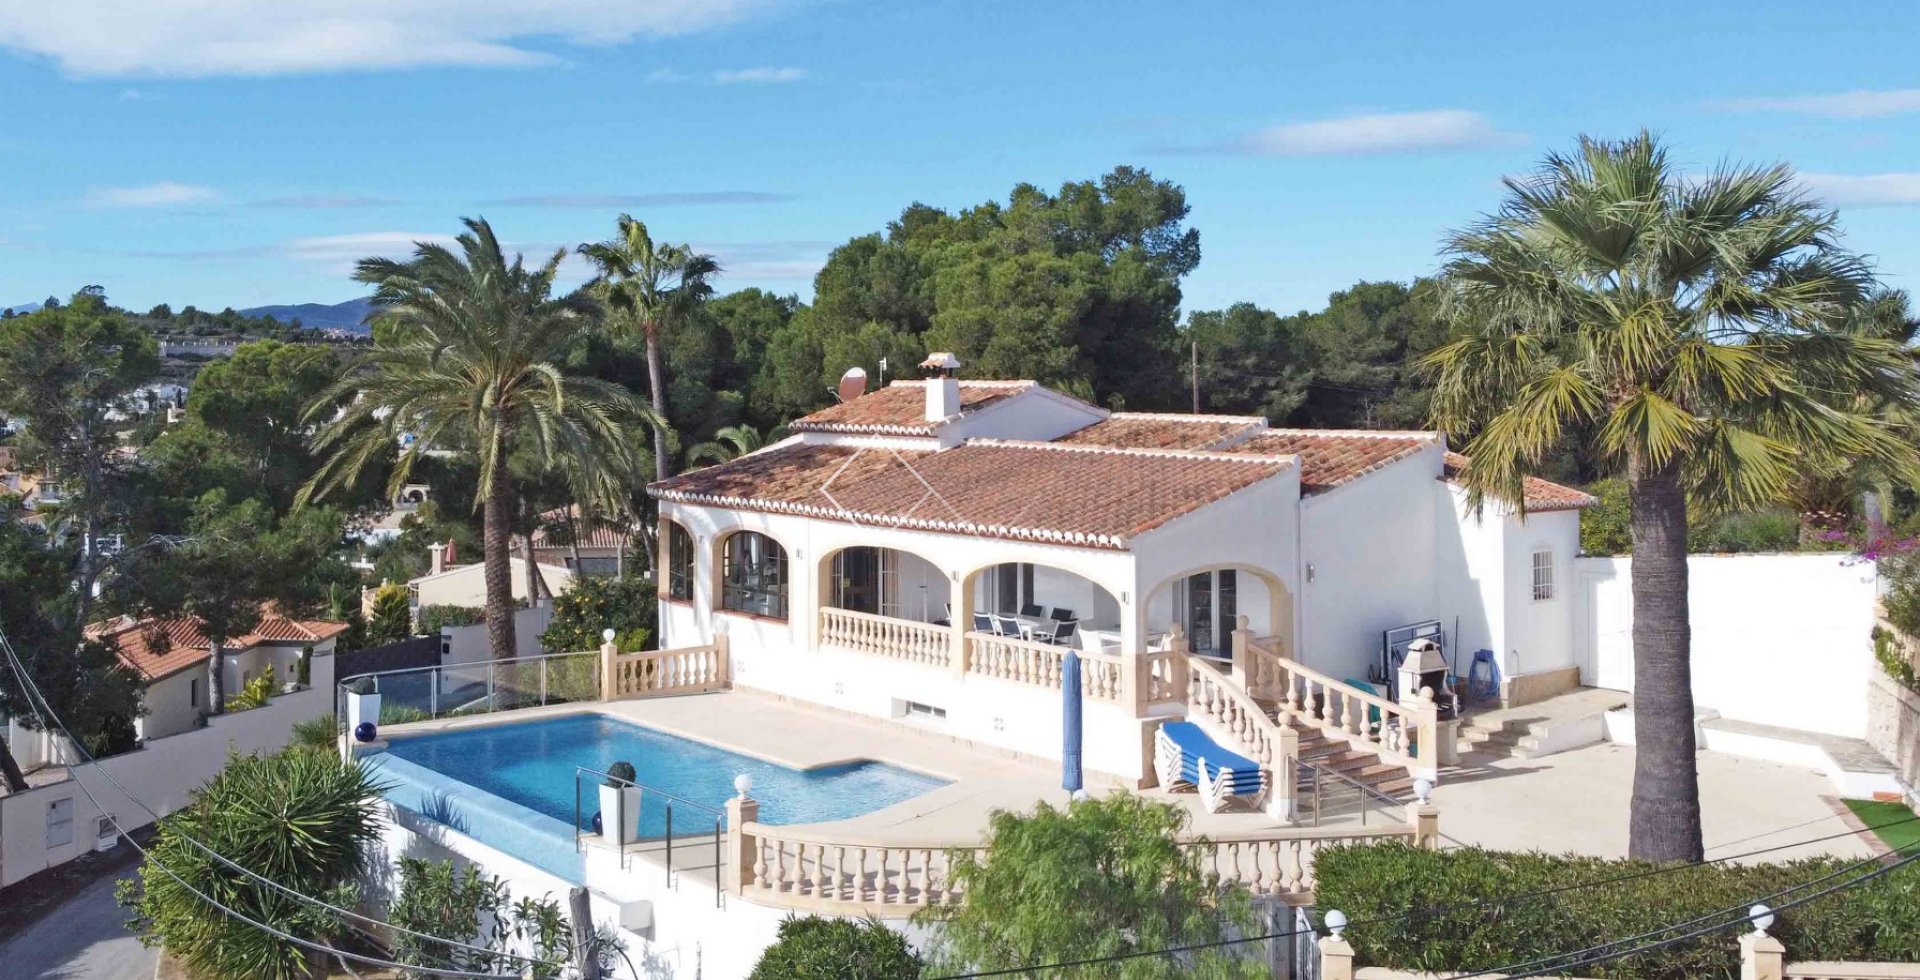 house and pool - Villa with spectacular sea views for sale in Moraira